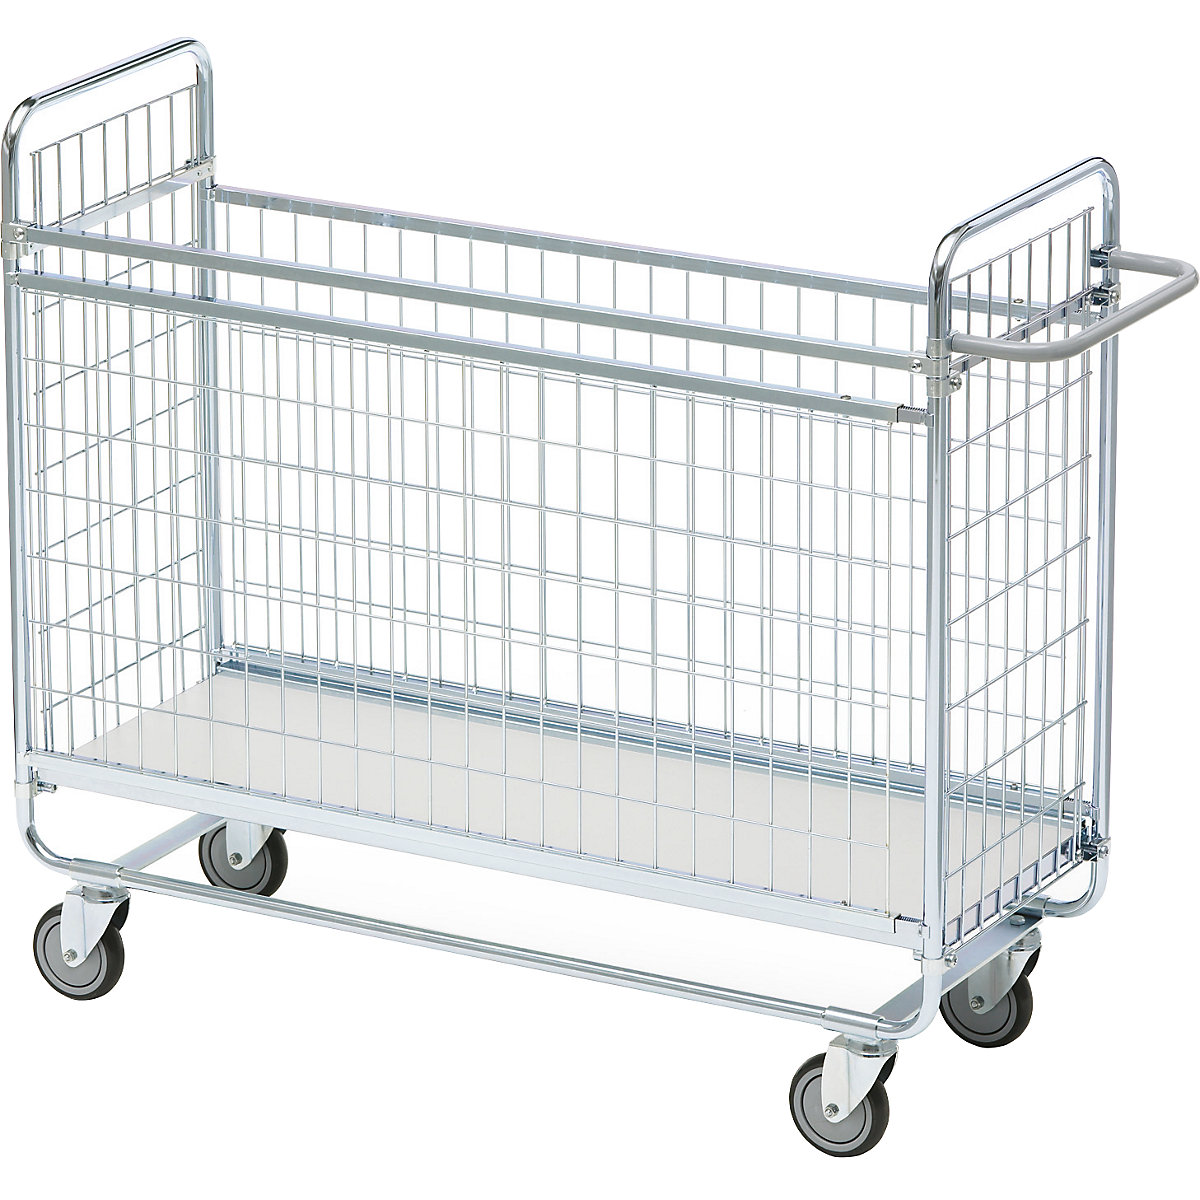 SERIES 100 four-sided trolley – HelgeNyberg, max. load 100 kg, LxWxH 800 x 460 x 1120 mm, 5+ items-4